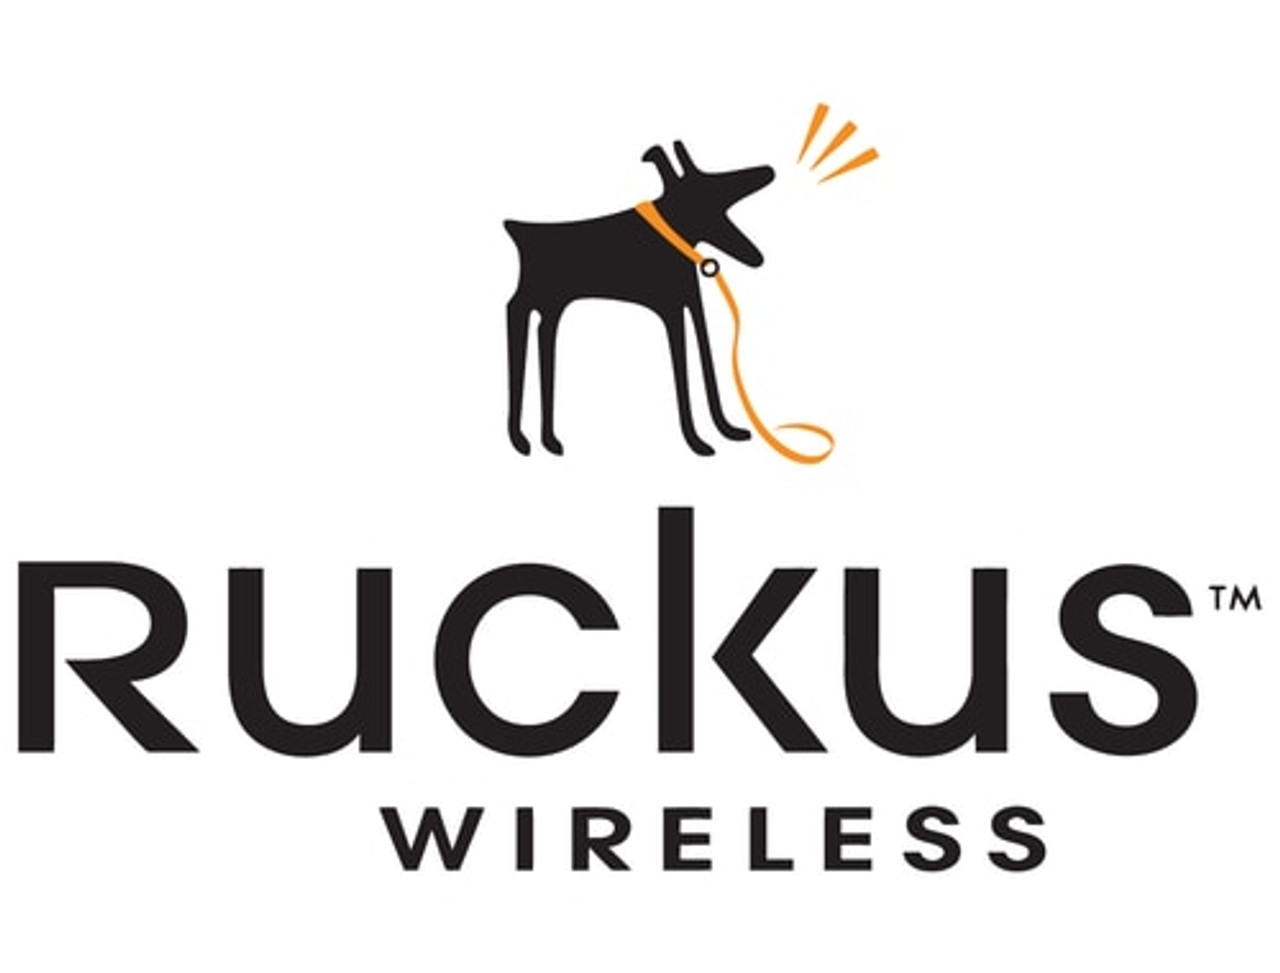 Ruckus Fiber Backpack (P01-0500-0000) Accessory - Bulk pack x25 units per box - Plastic Cover for standalone installation use-cases. This accessory is to be used to cover over the cables and the internal cavity of the Fiber Backpack